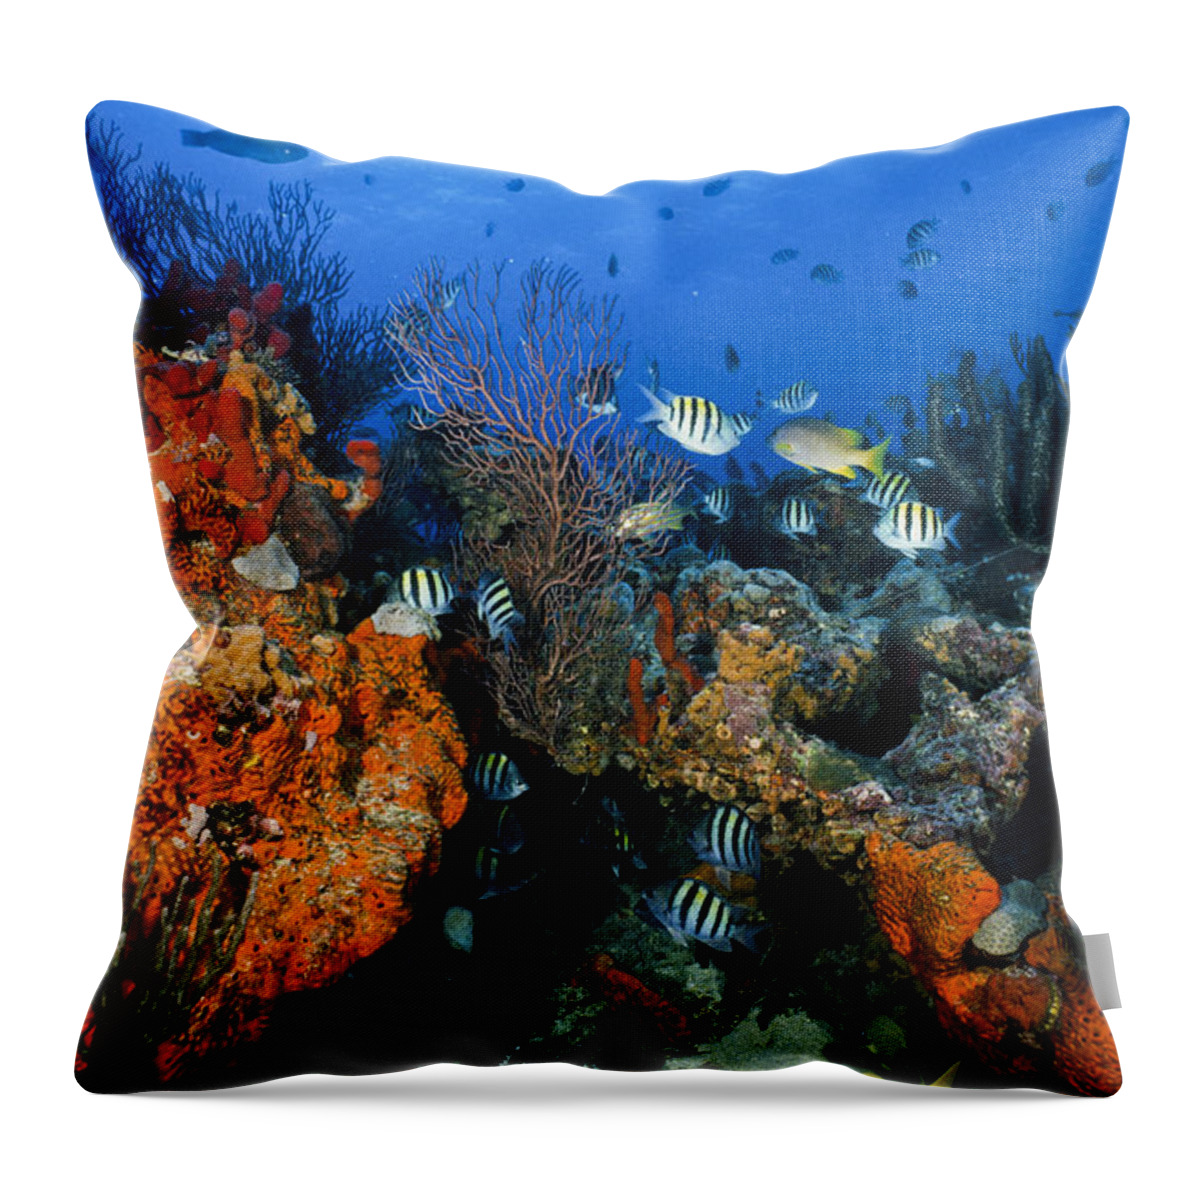 Art Throw Pillow featuring the photograph The Active Reef by Sandra Edwards